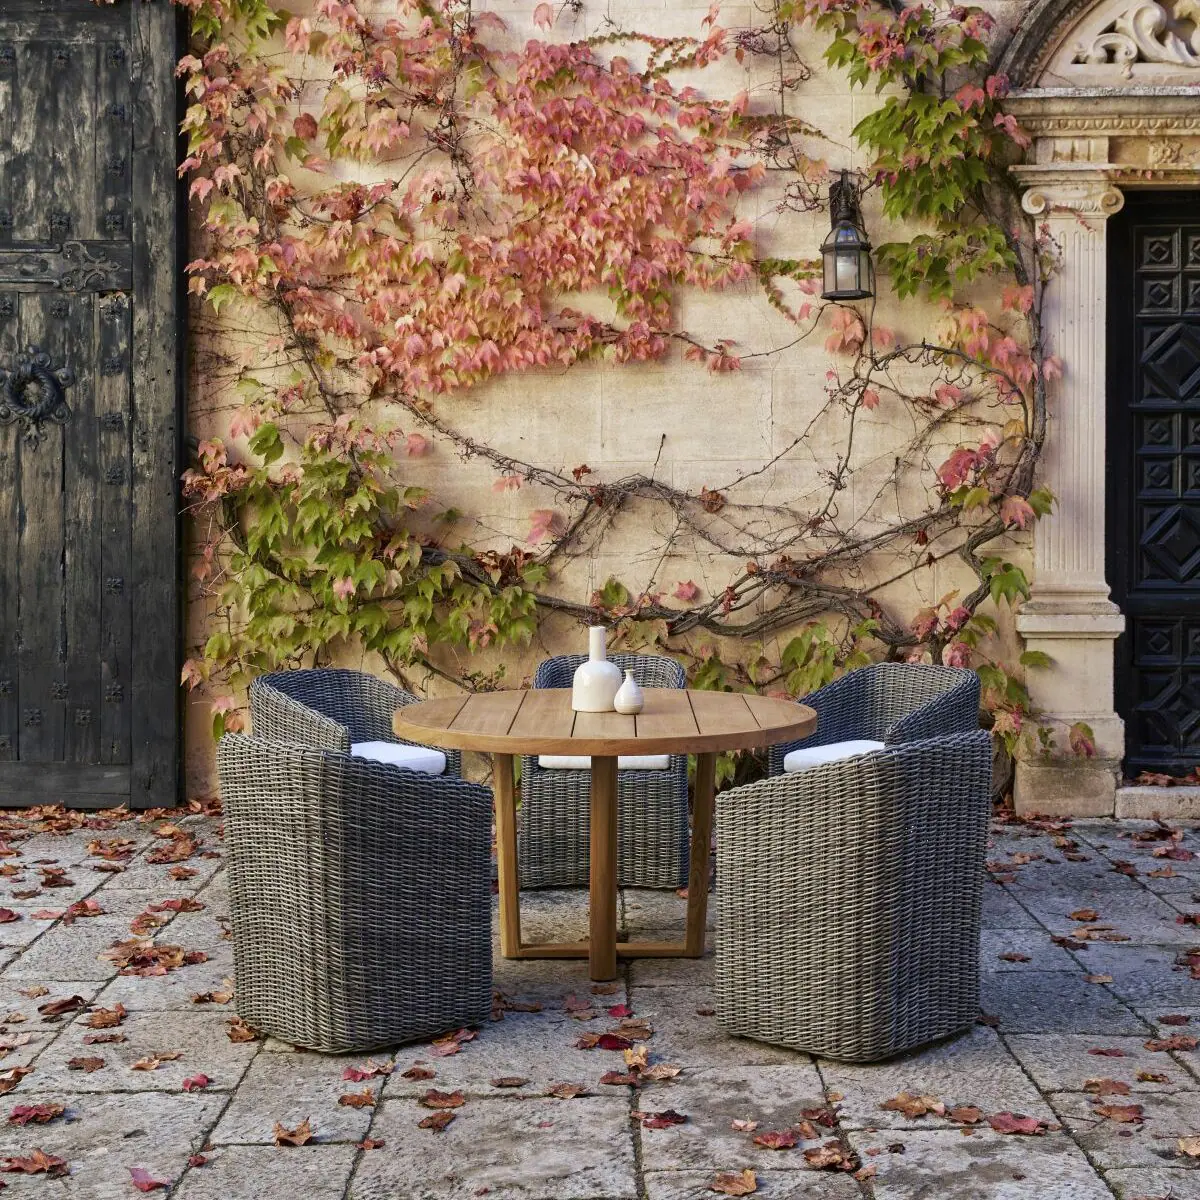 point-heritage-outdoor-furniture42-aspect-ratio-100-100-2